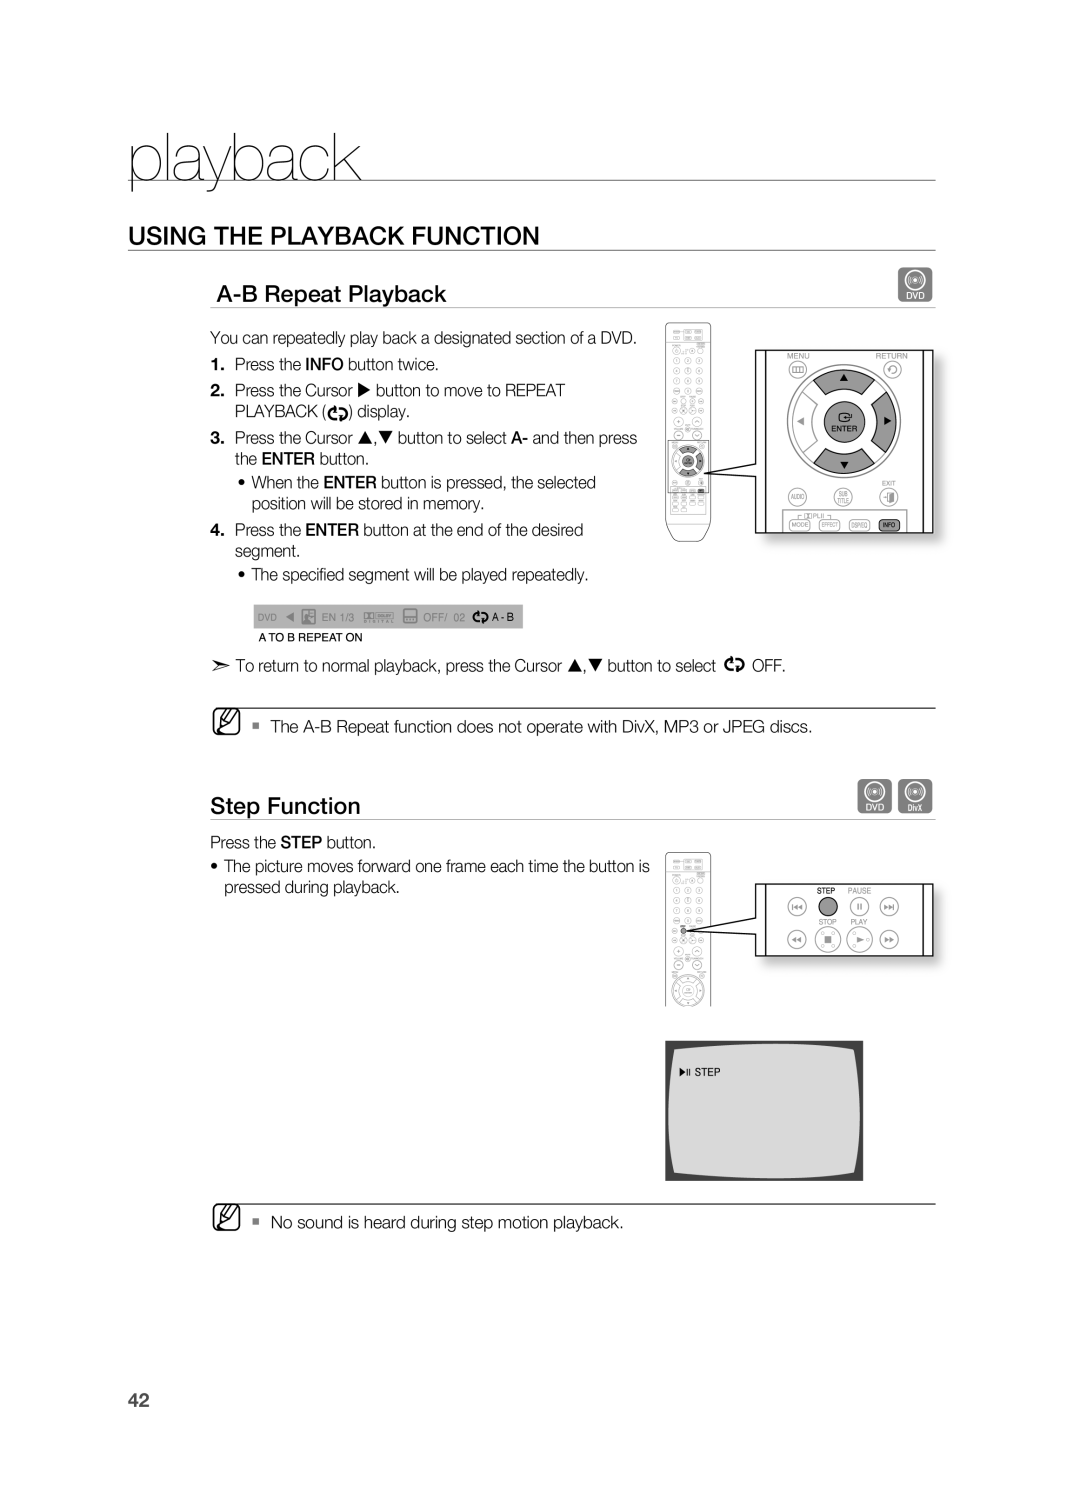 Samsung HT-TWZ415 user manual playback, USINg THE PLAYBACK FUNCTION, A-Brepeat Playback, Step Function 